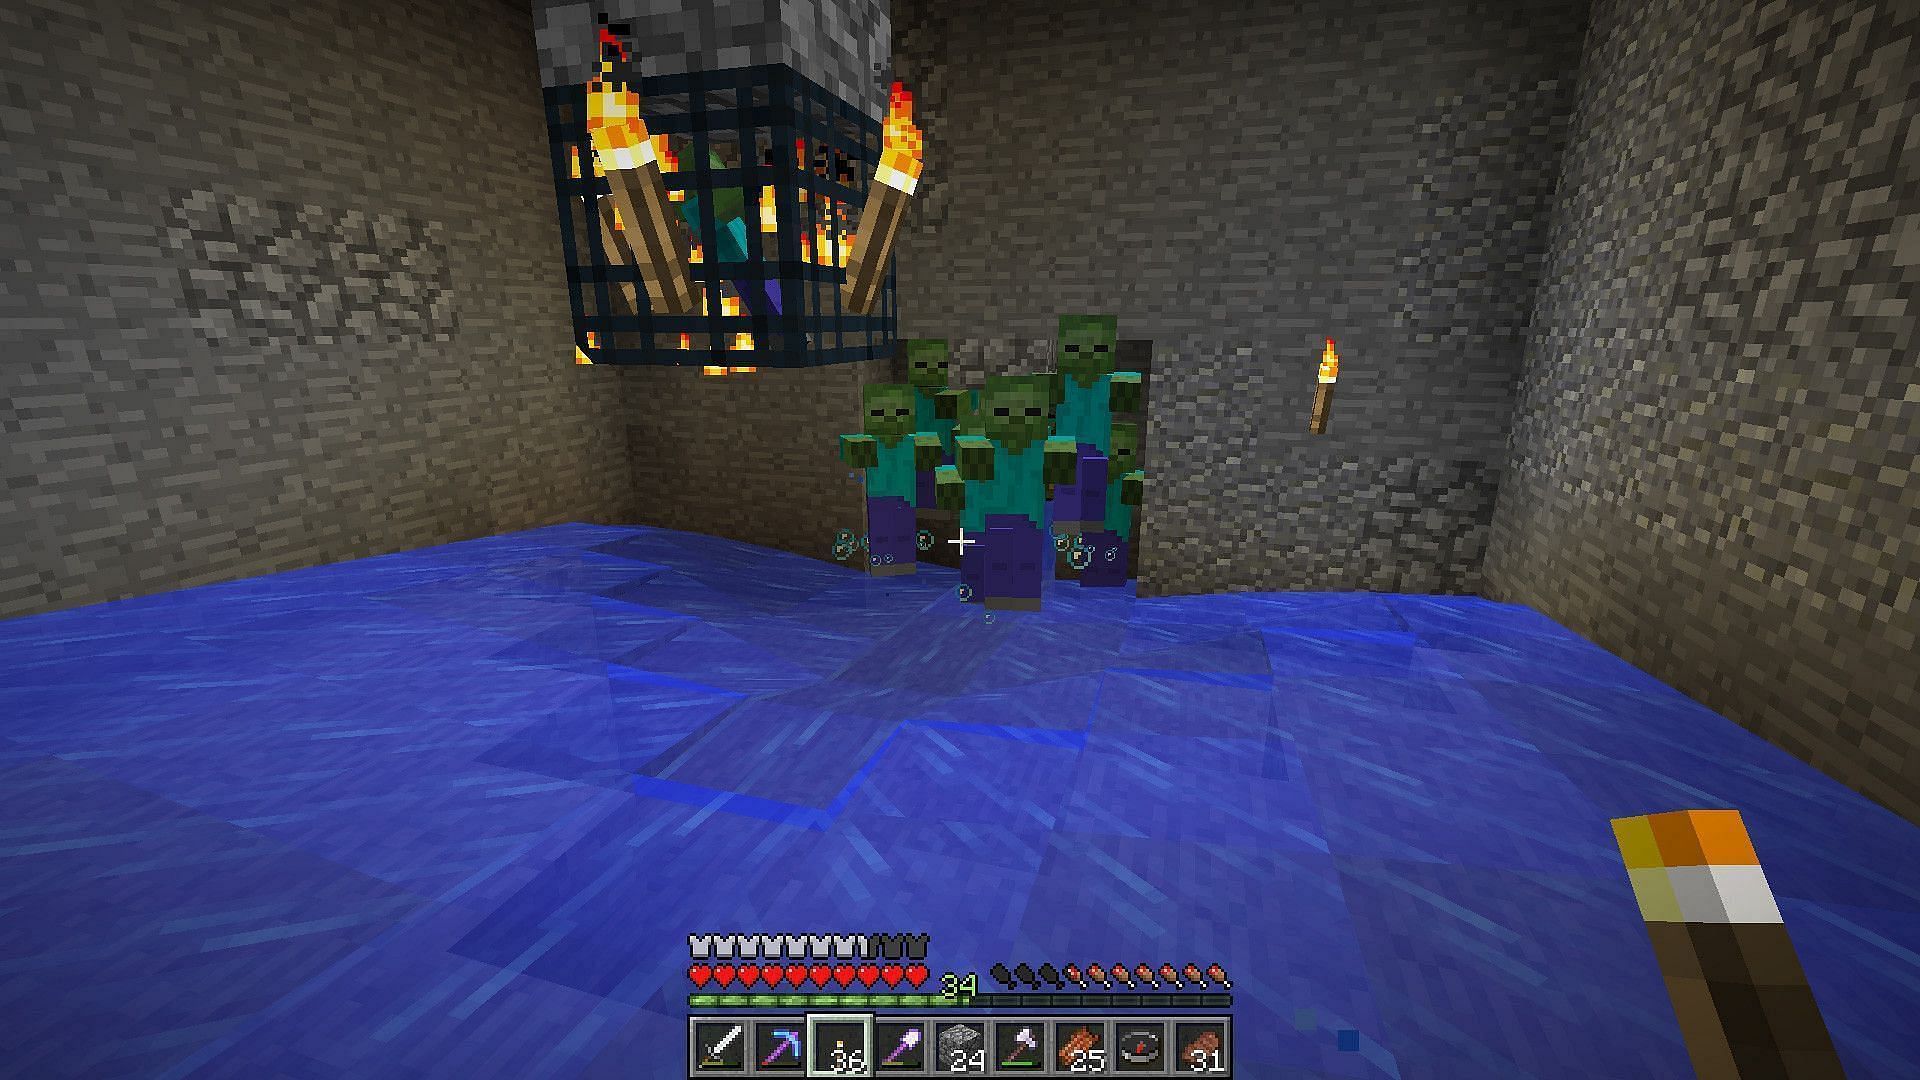 Obtaining a mob spawner typically requires commands (Image via Mojang)